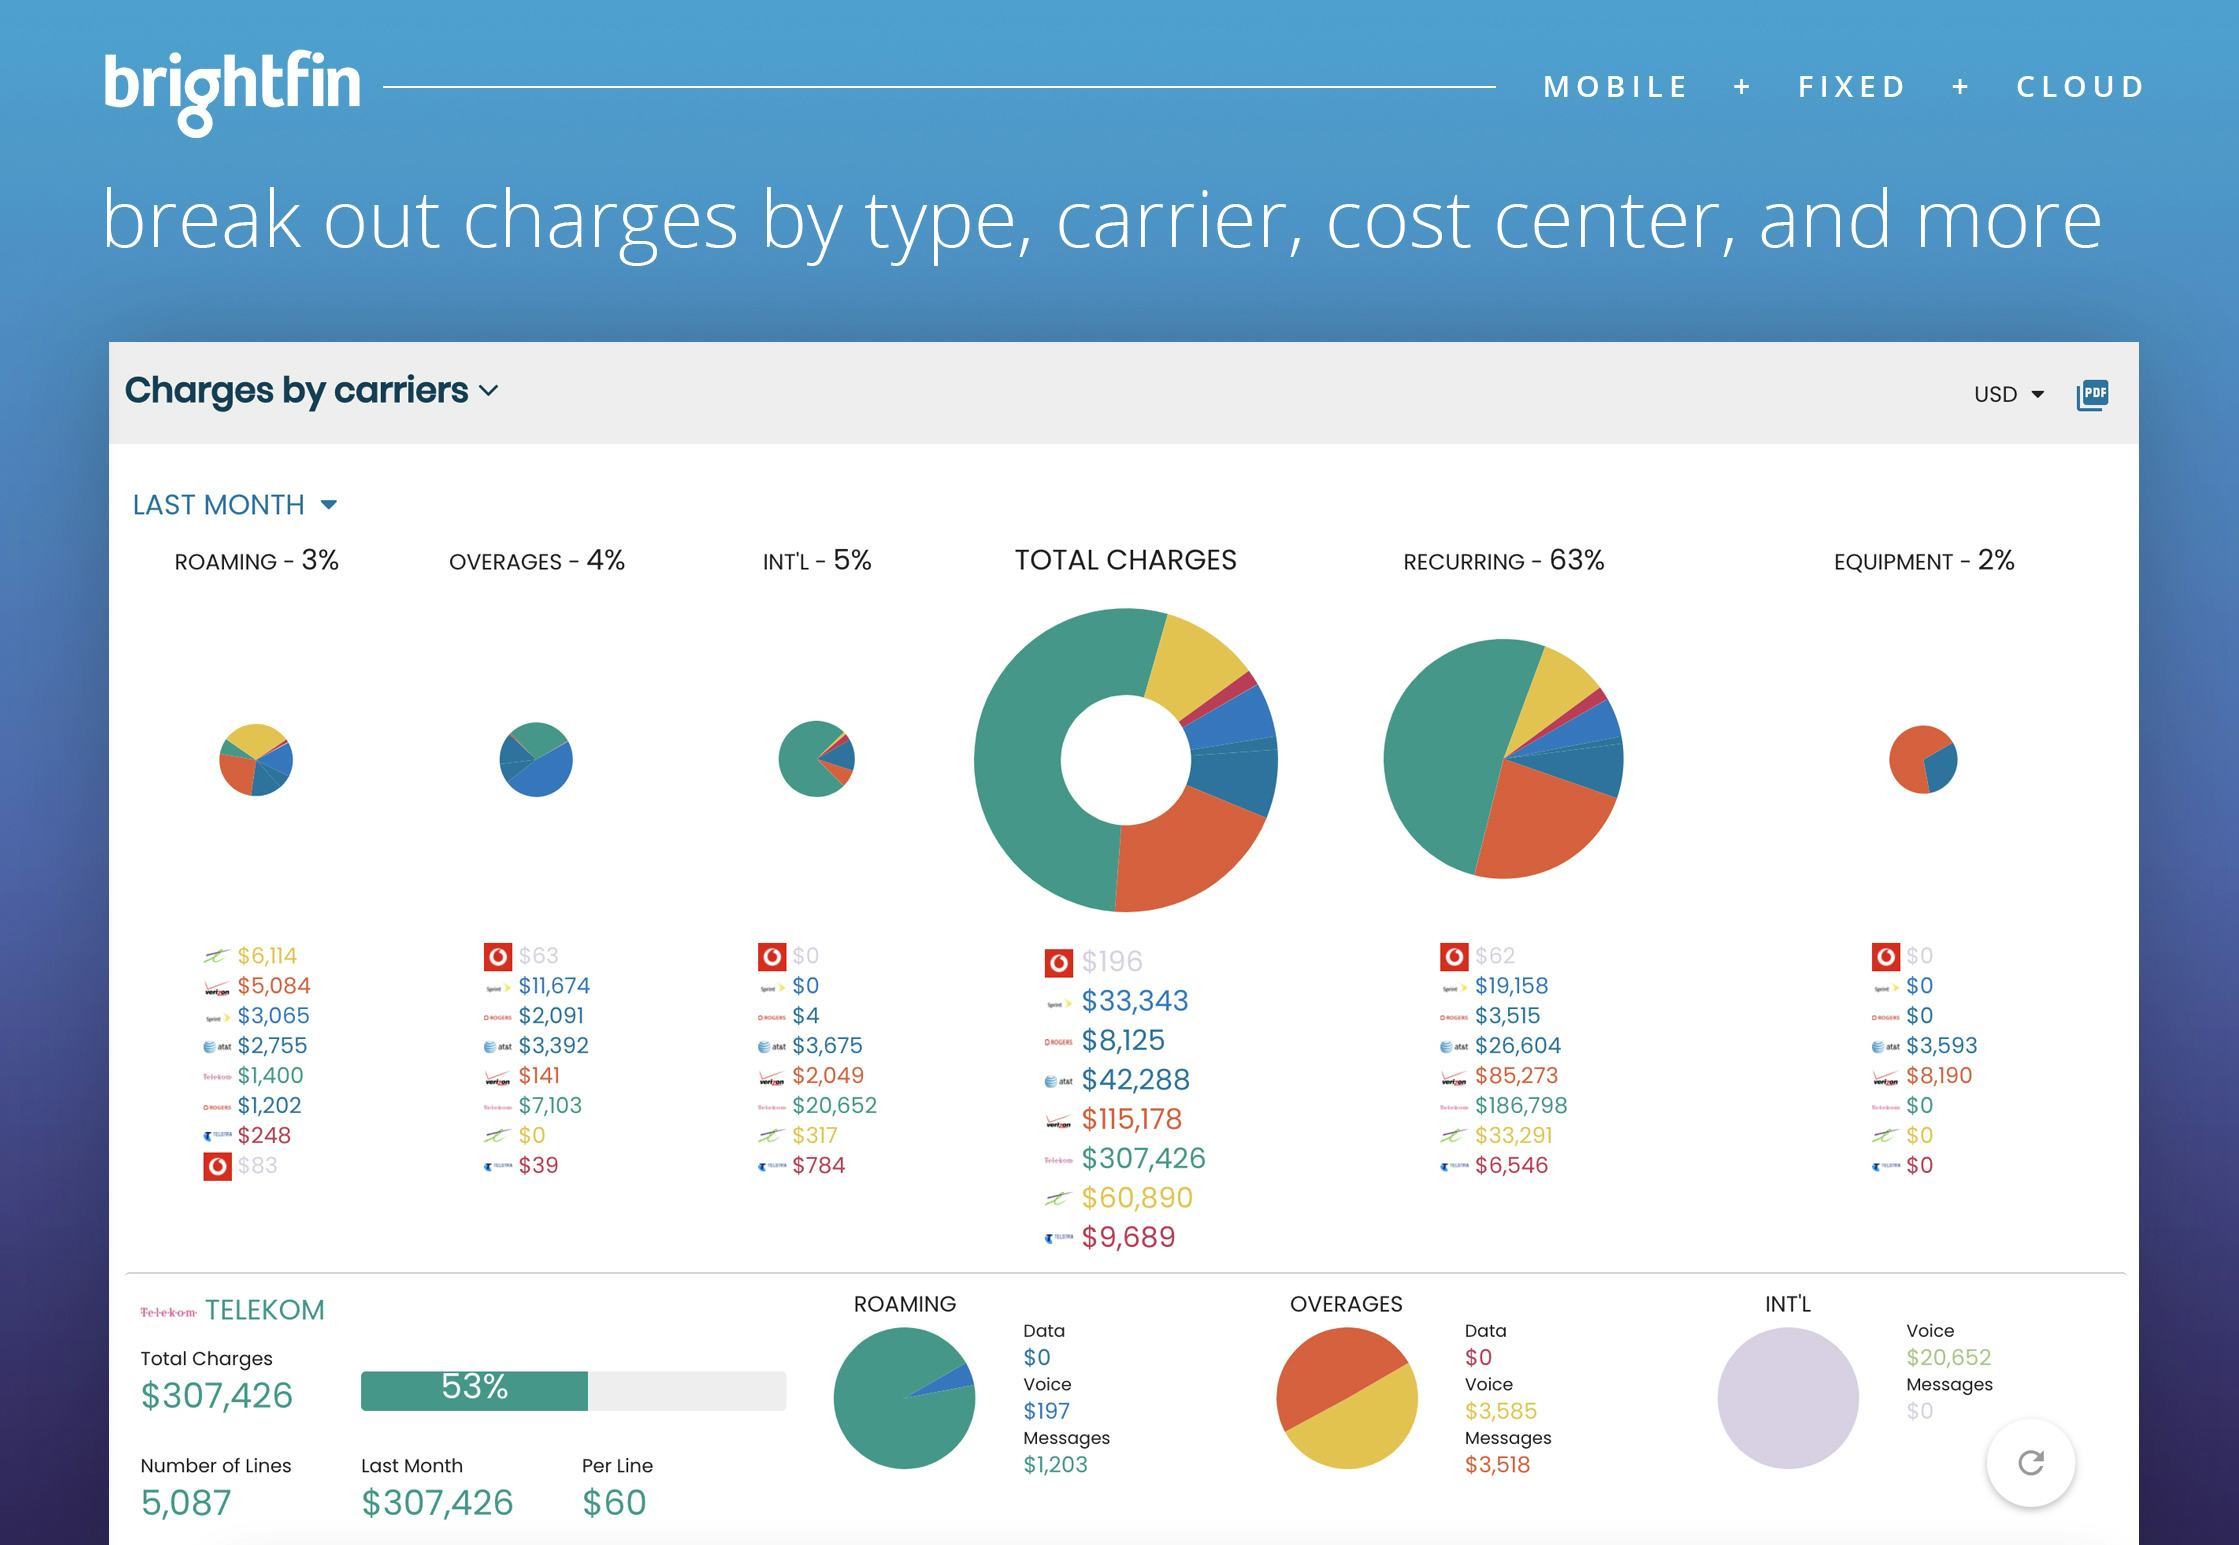 brightfin Software - Break out charges by type, carrier, cost center, and more